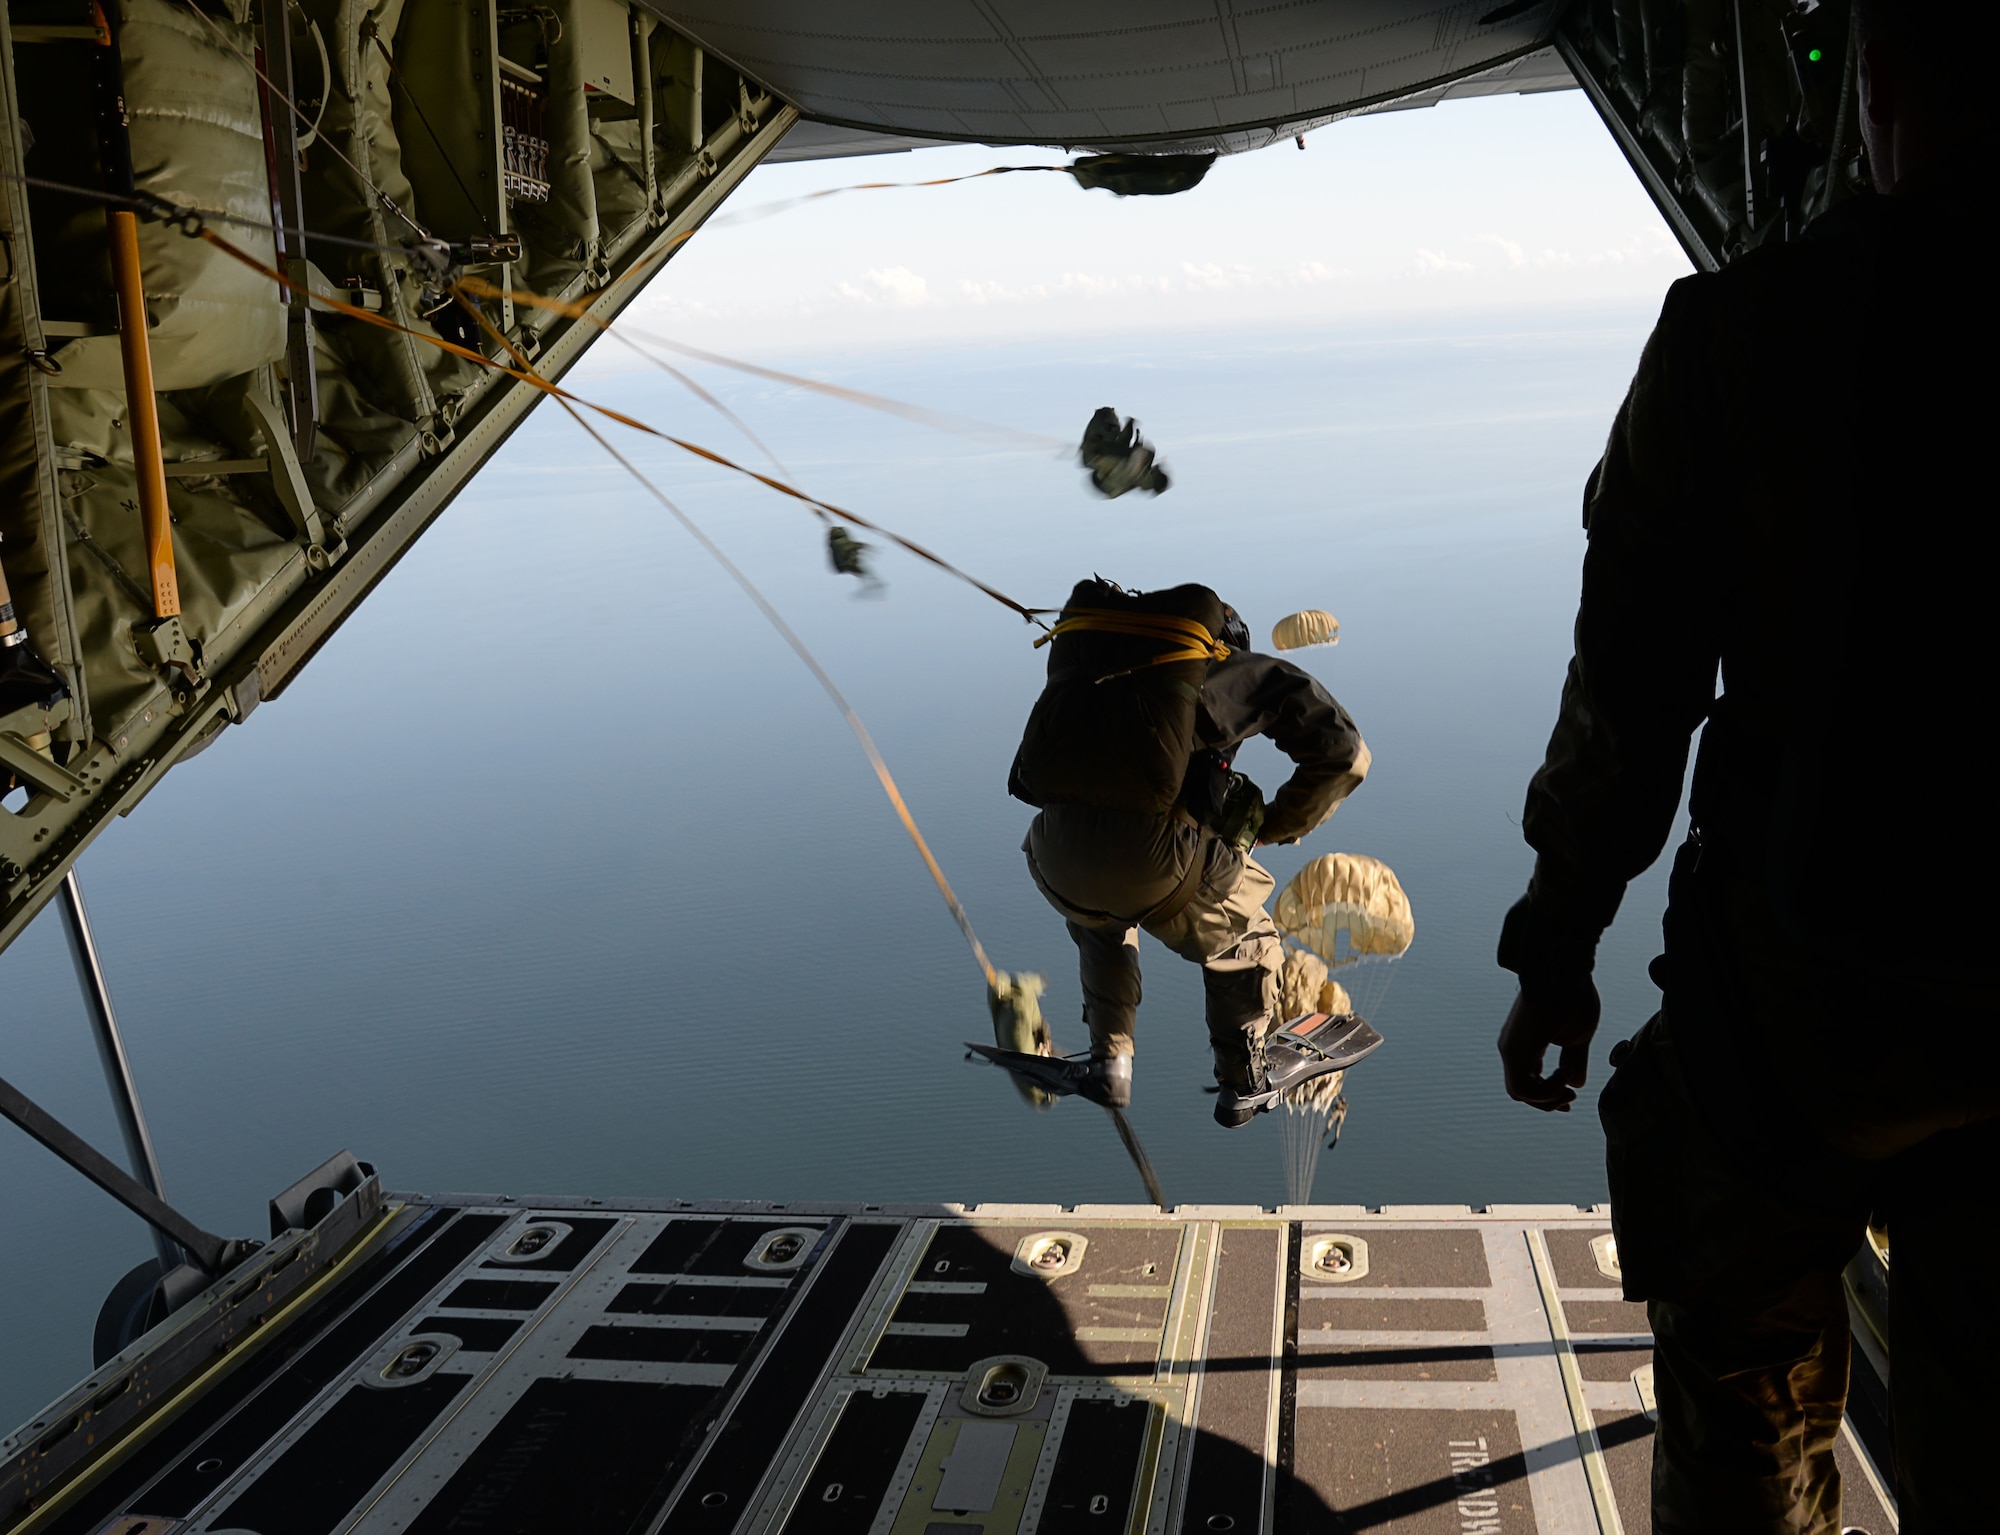 Danish air commandos perform a static-line jump from an U.S. Air Force MC-130J Commando II assigned to the 67th Special Operations Squadron, over the Little Belt Strait in Denmark Sept. 27, 2016. Airmen from RAF Mildenhall, England and U.S. Navy Special Warfare Combatant-Craft crewmen worked with ally forces during the 2016 Night Hawk exercise testing joint force capabilities. (U.S. Air Force photo by Senior Airman Justine Rho)